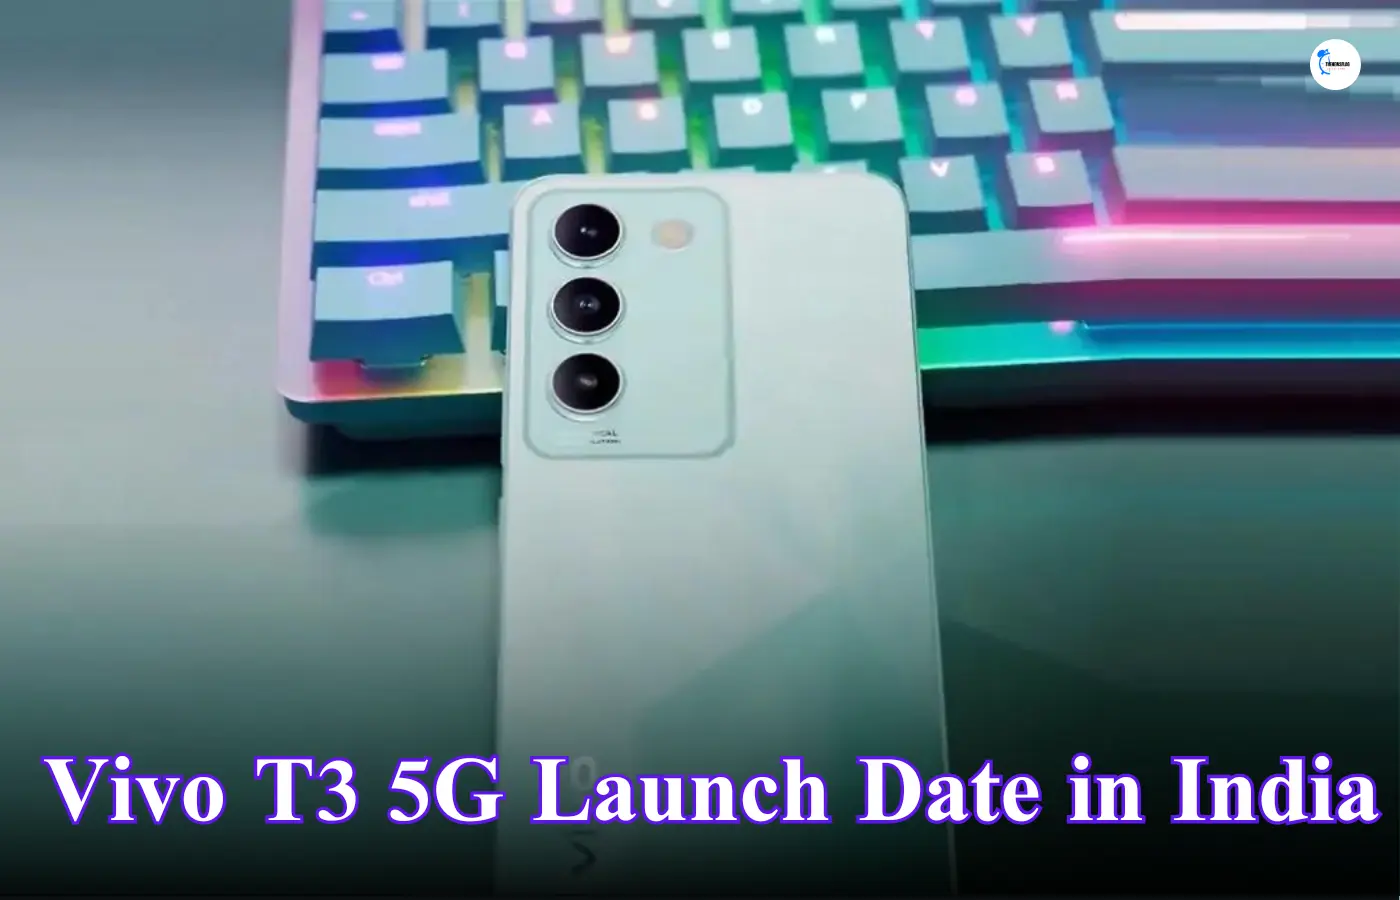 Vivo T3 5G Launch Date in India